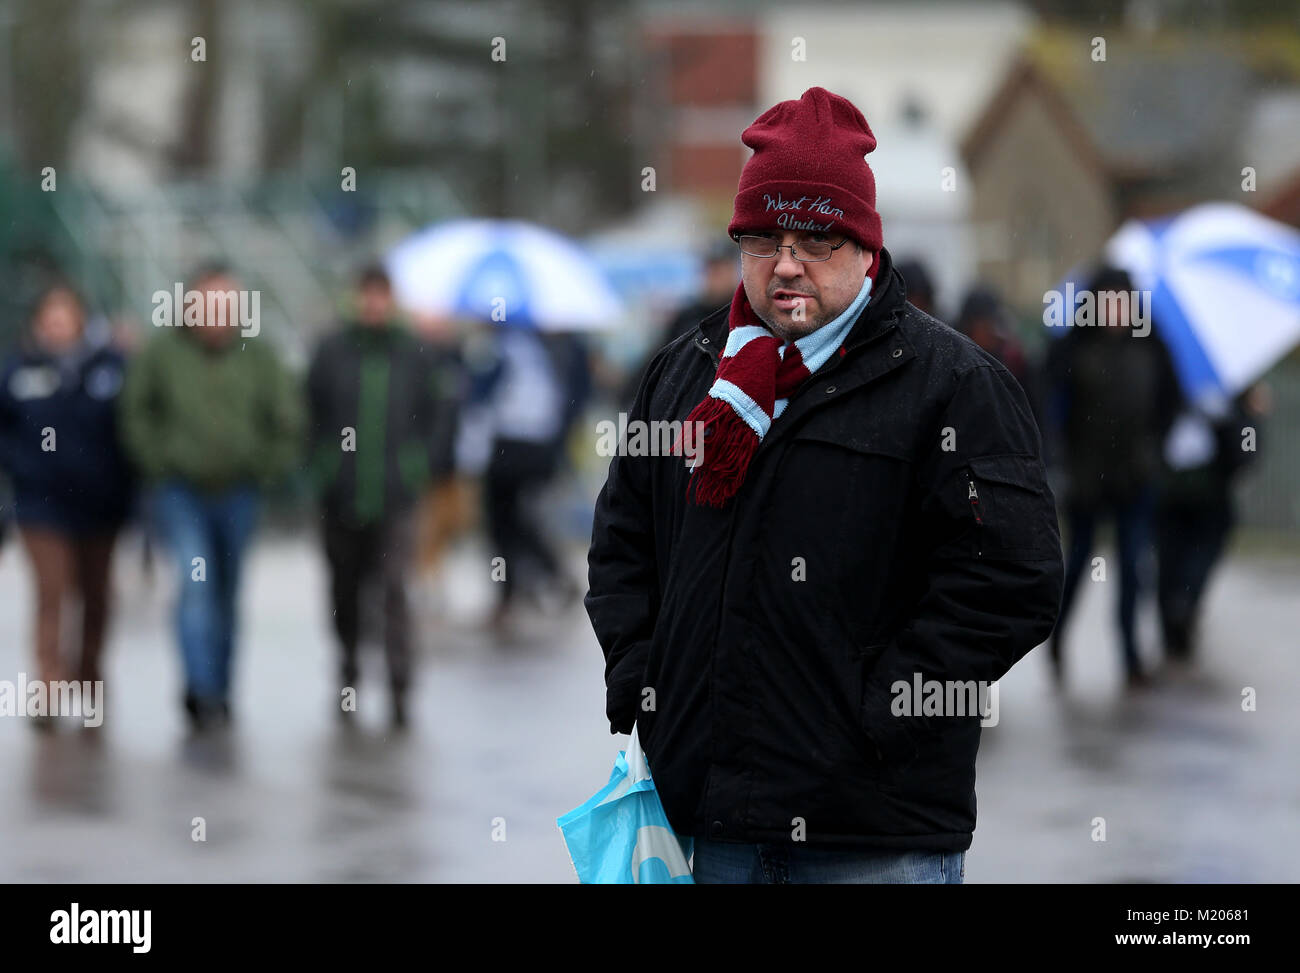 West Ham United fan before the Premier League match at the AMEX Stadium, Brighton. Stock Photo